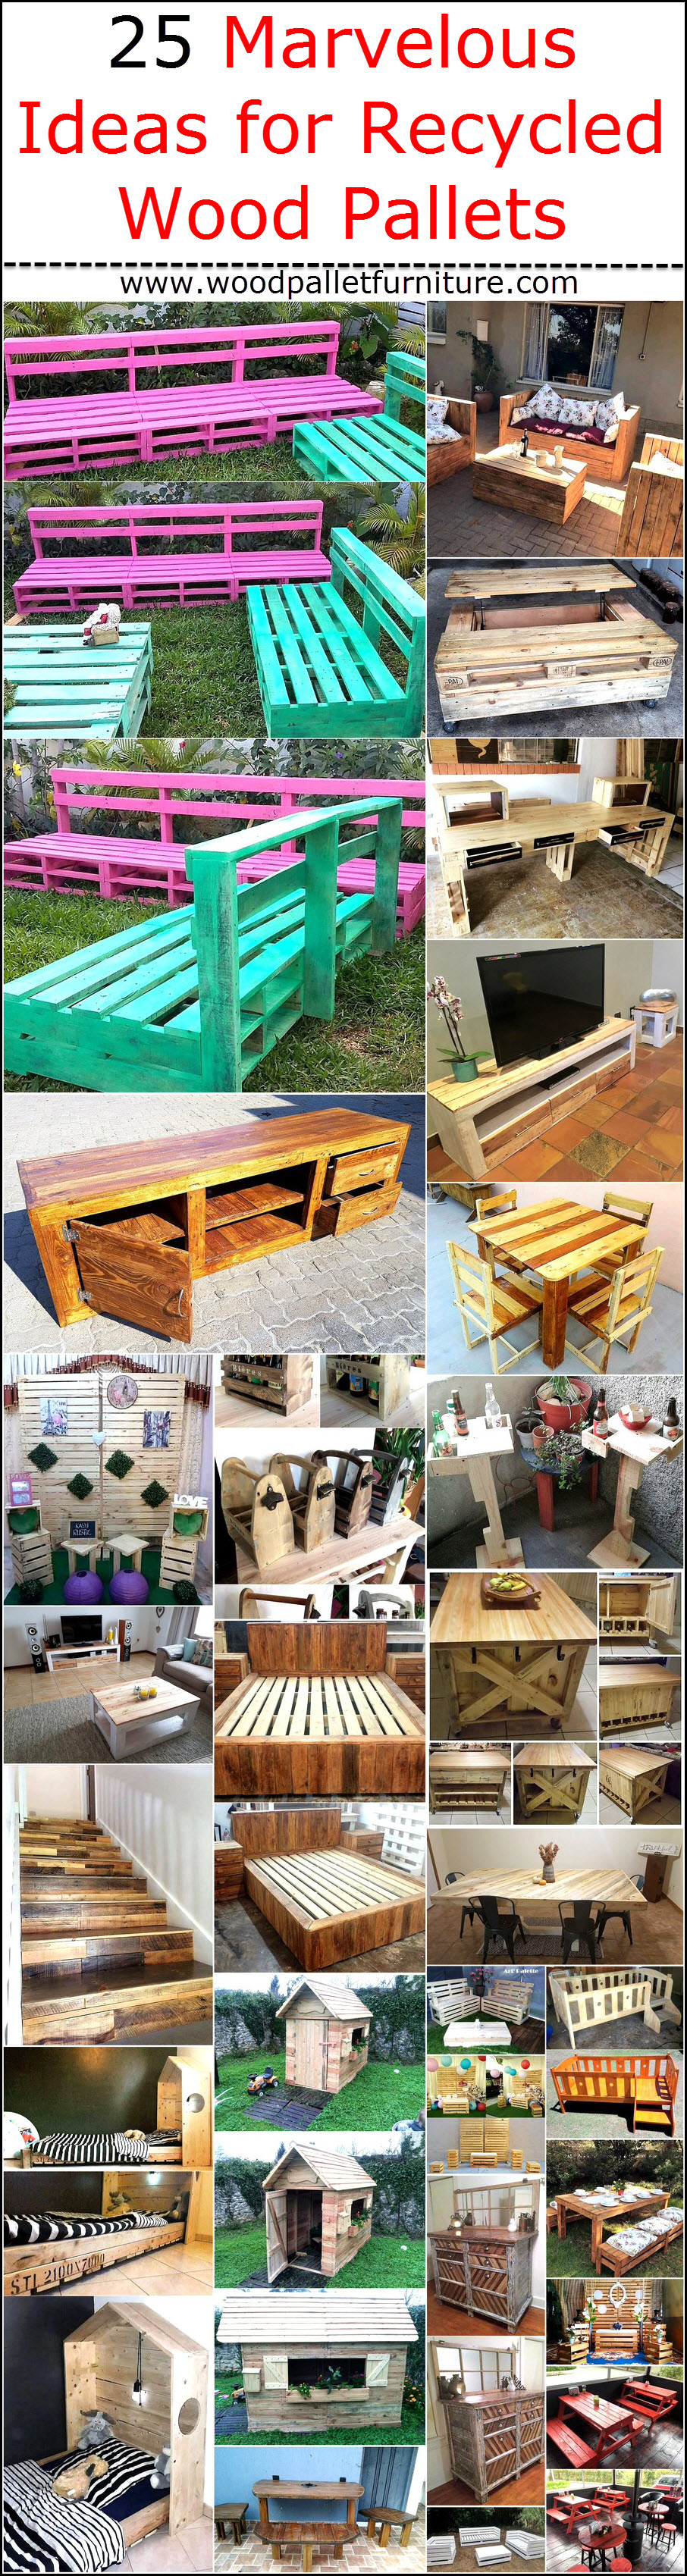 25-marvelous-ideas-for-recycled-wood-pallets